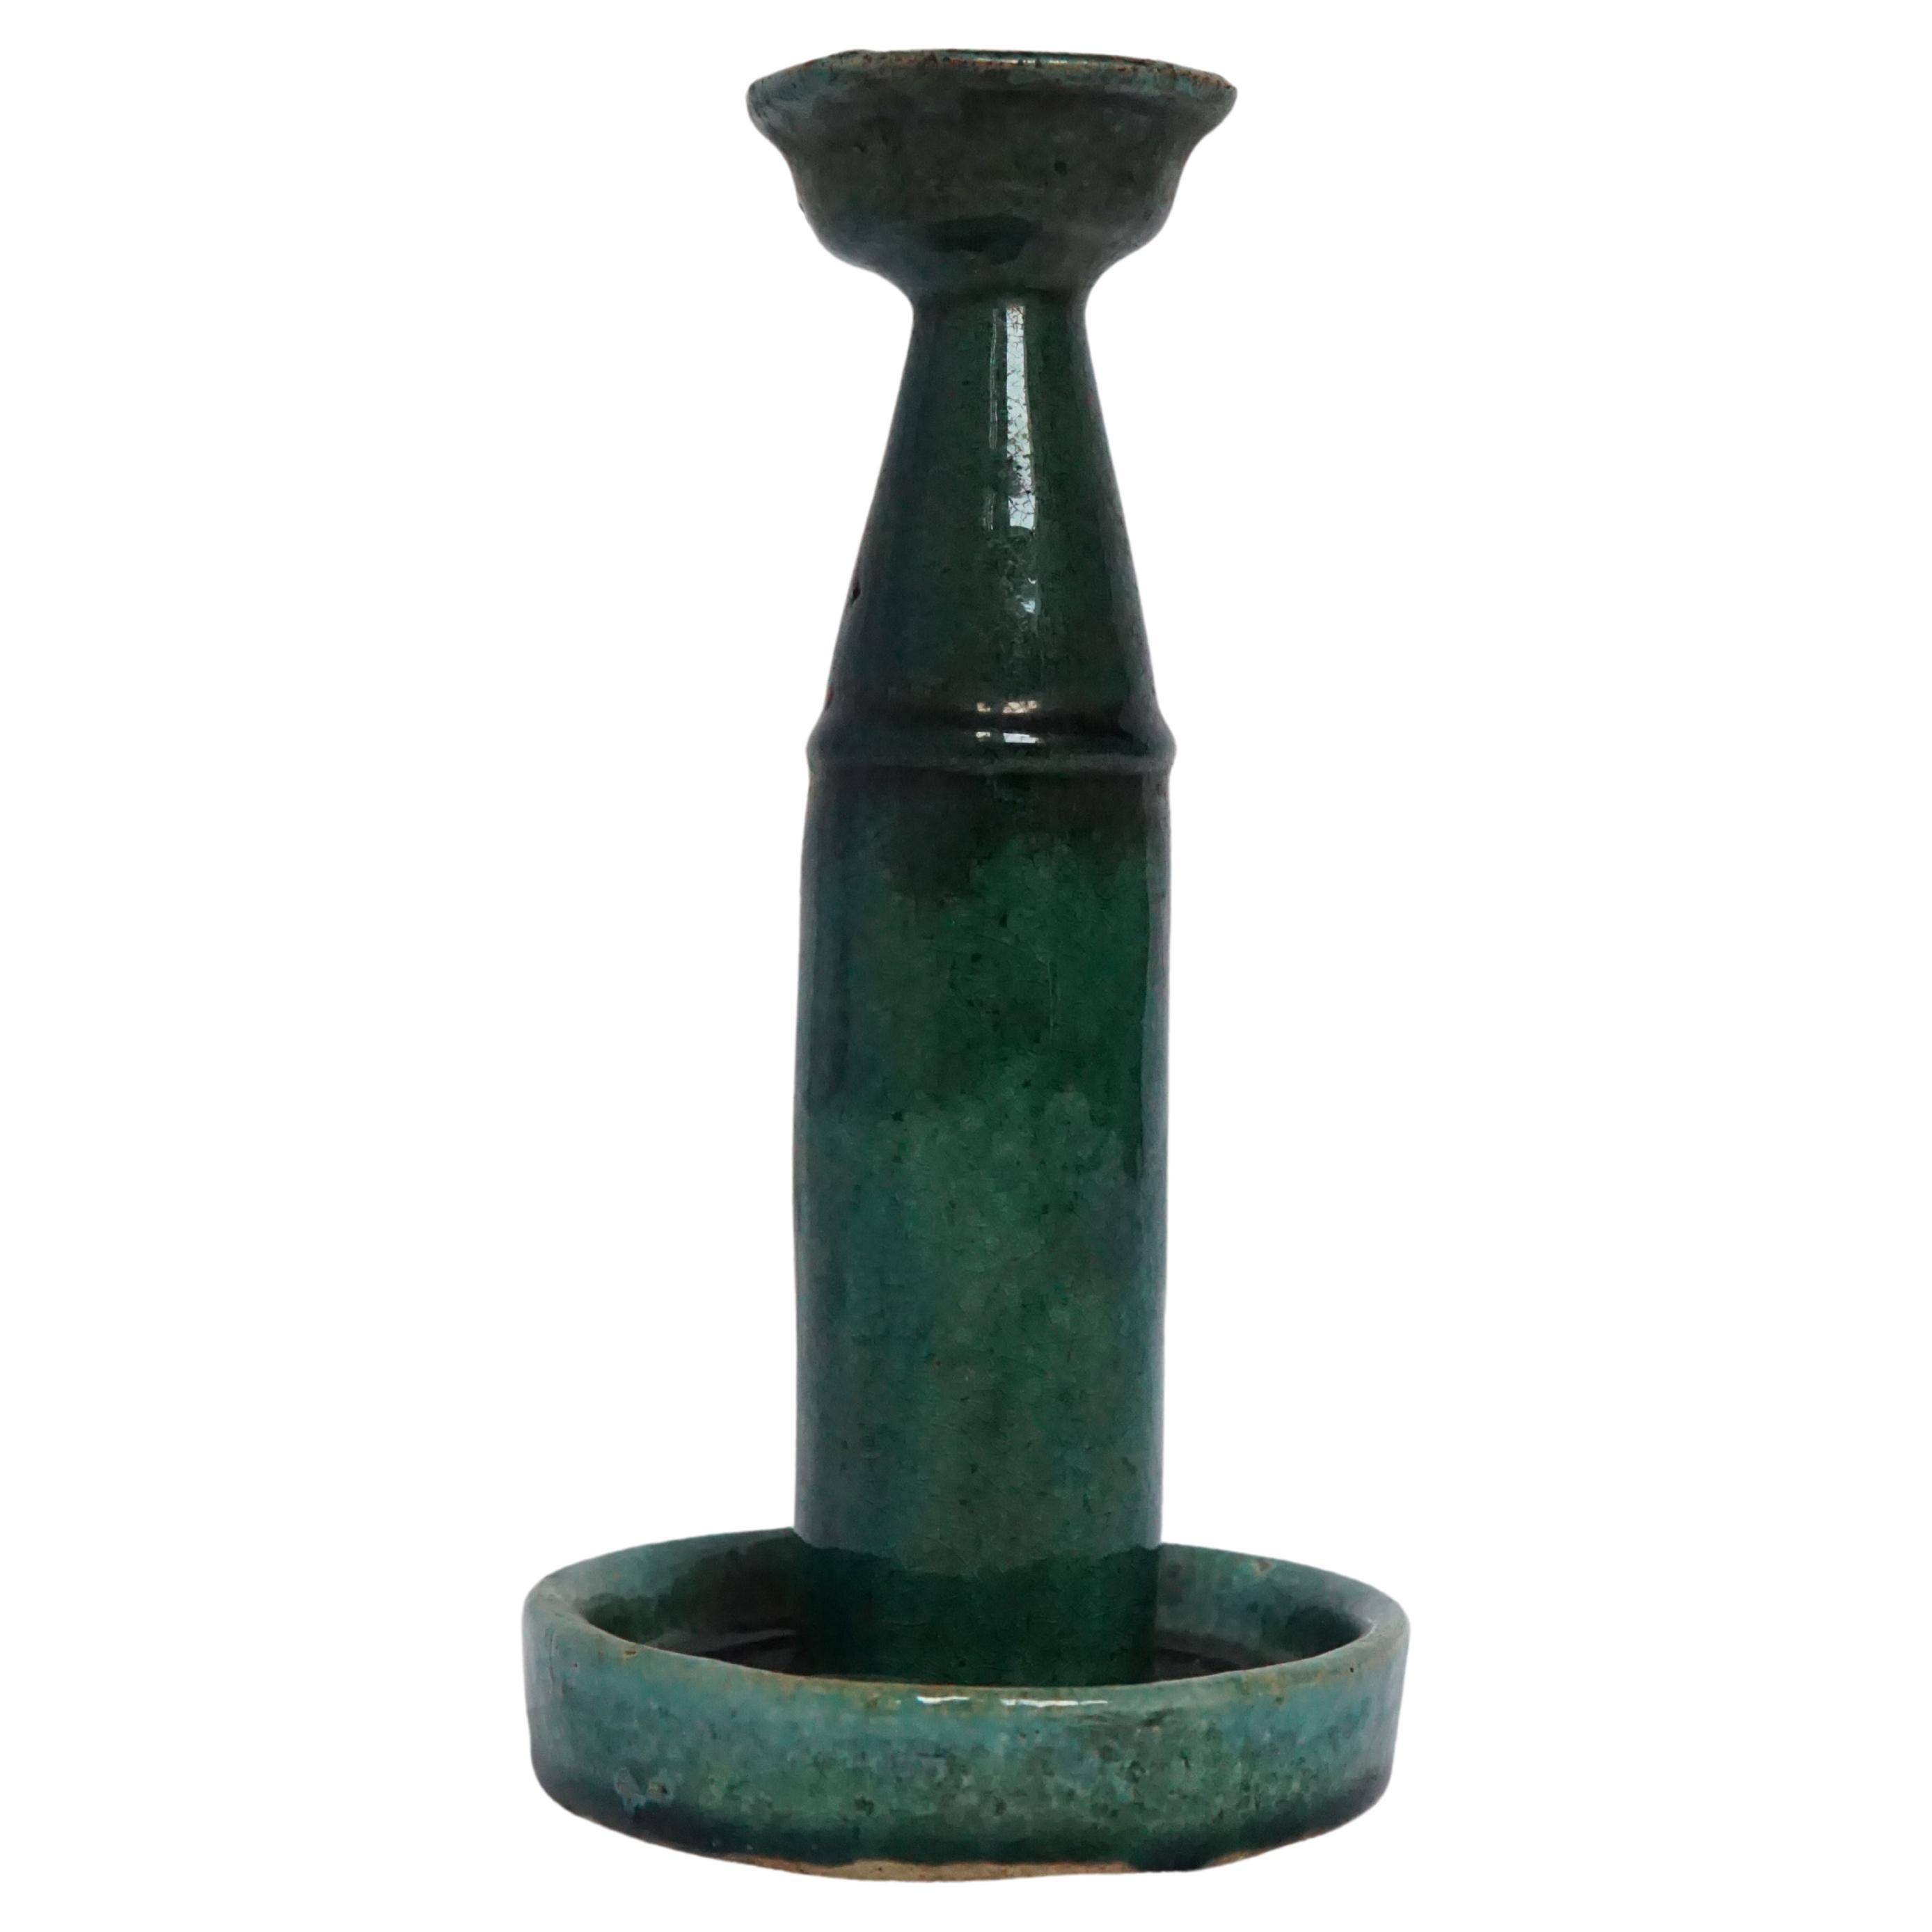 Chinese Ceramic 'Shiwan' Oil Lamp / Candle Holder, Green Glaze, c. 1950 For Sale